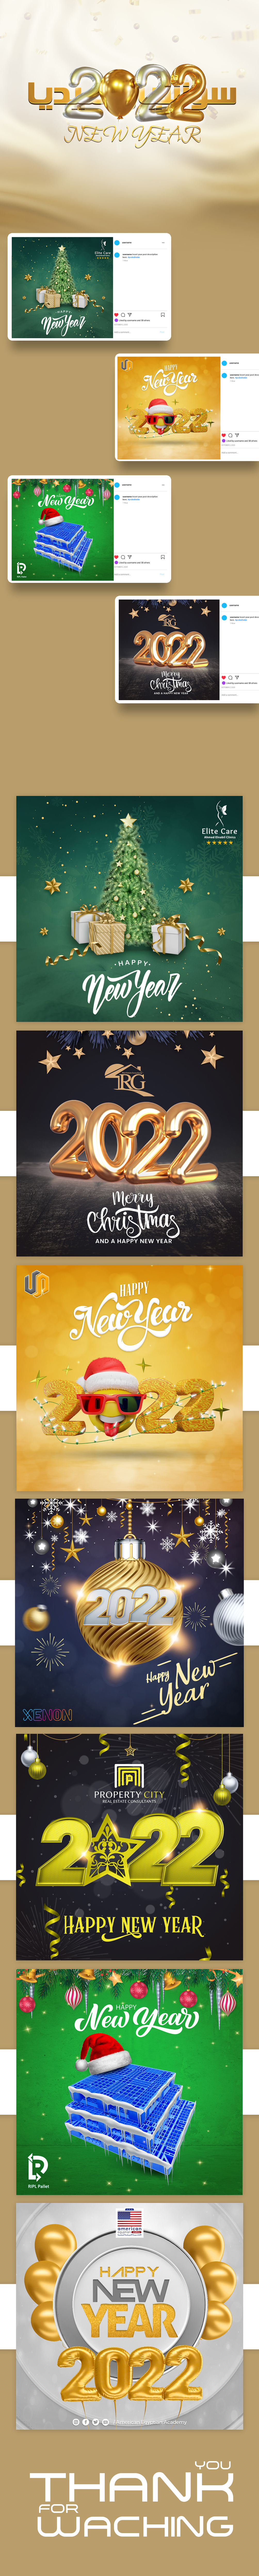 Christmas happy new year new year post social media Social Media Design Social media post Socialmedia